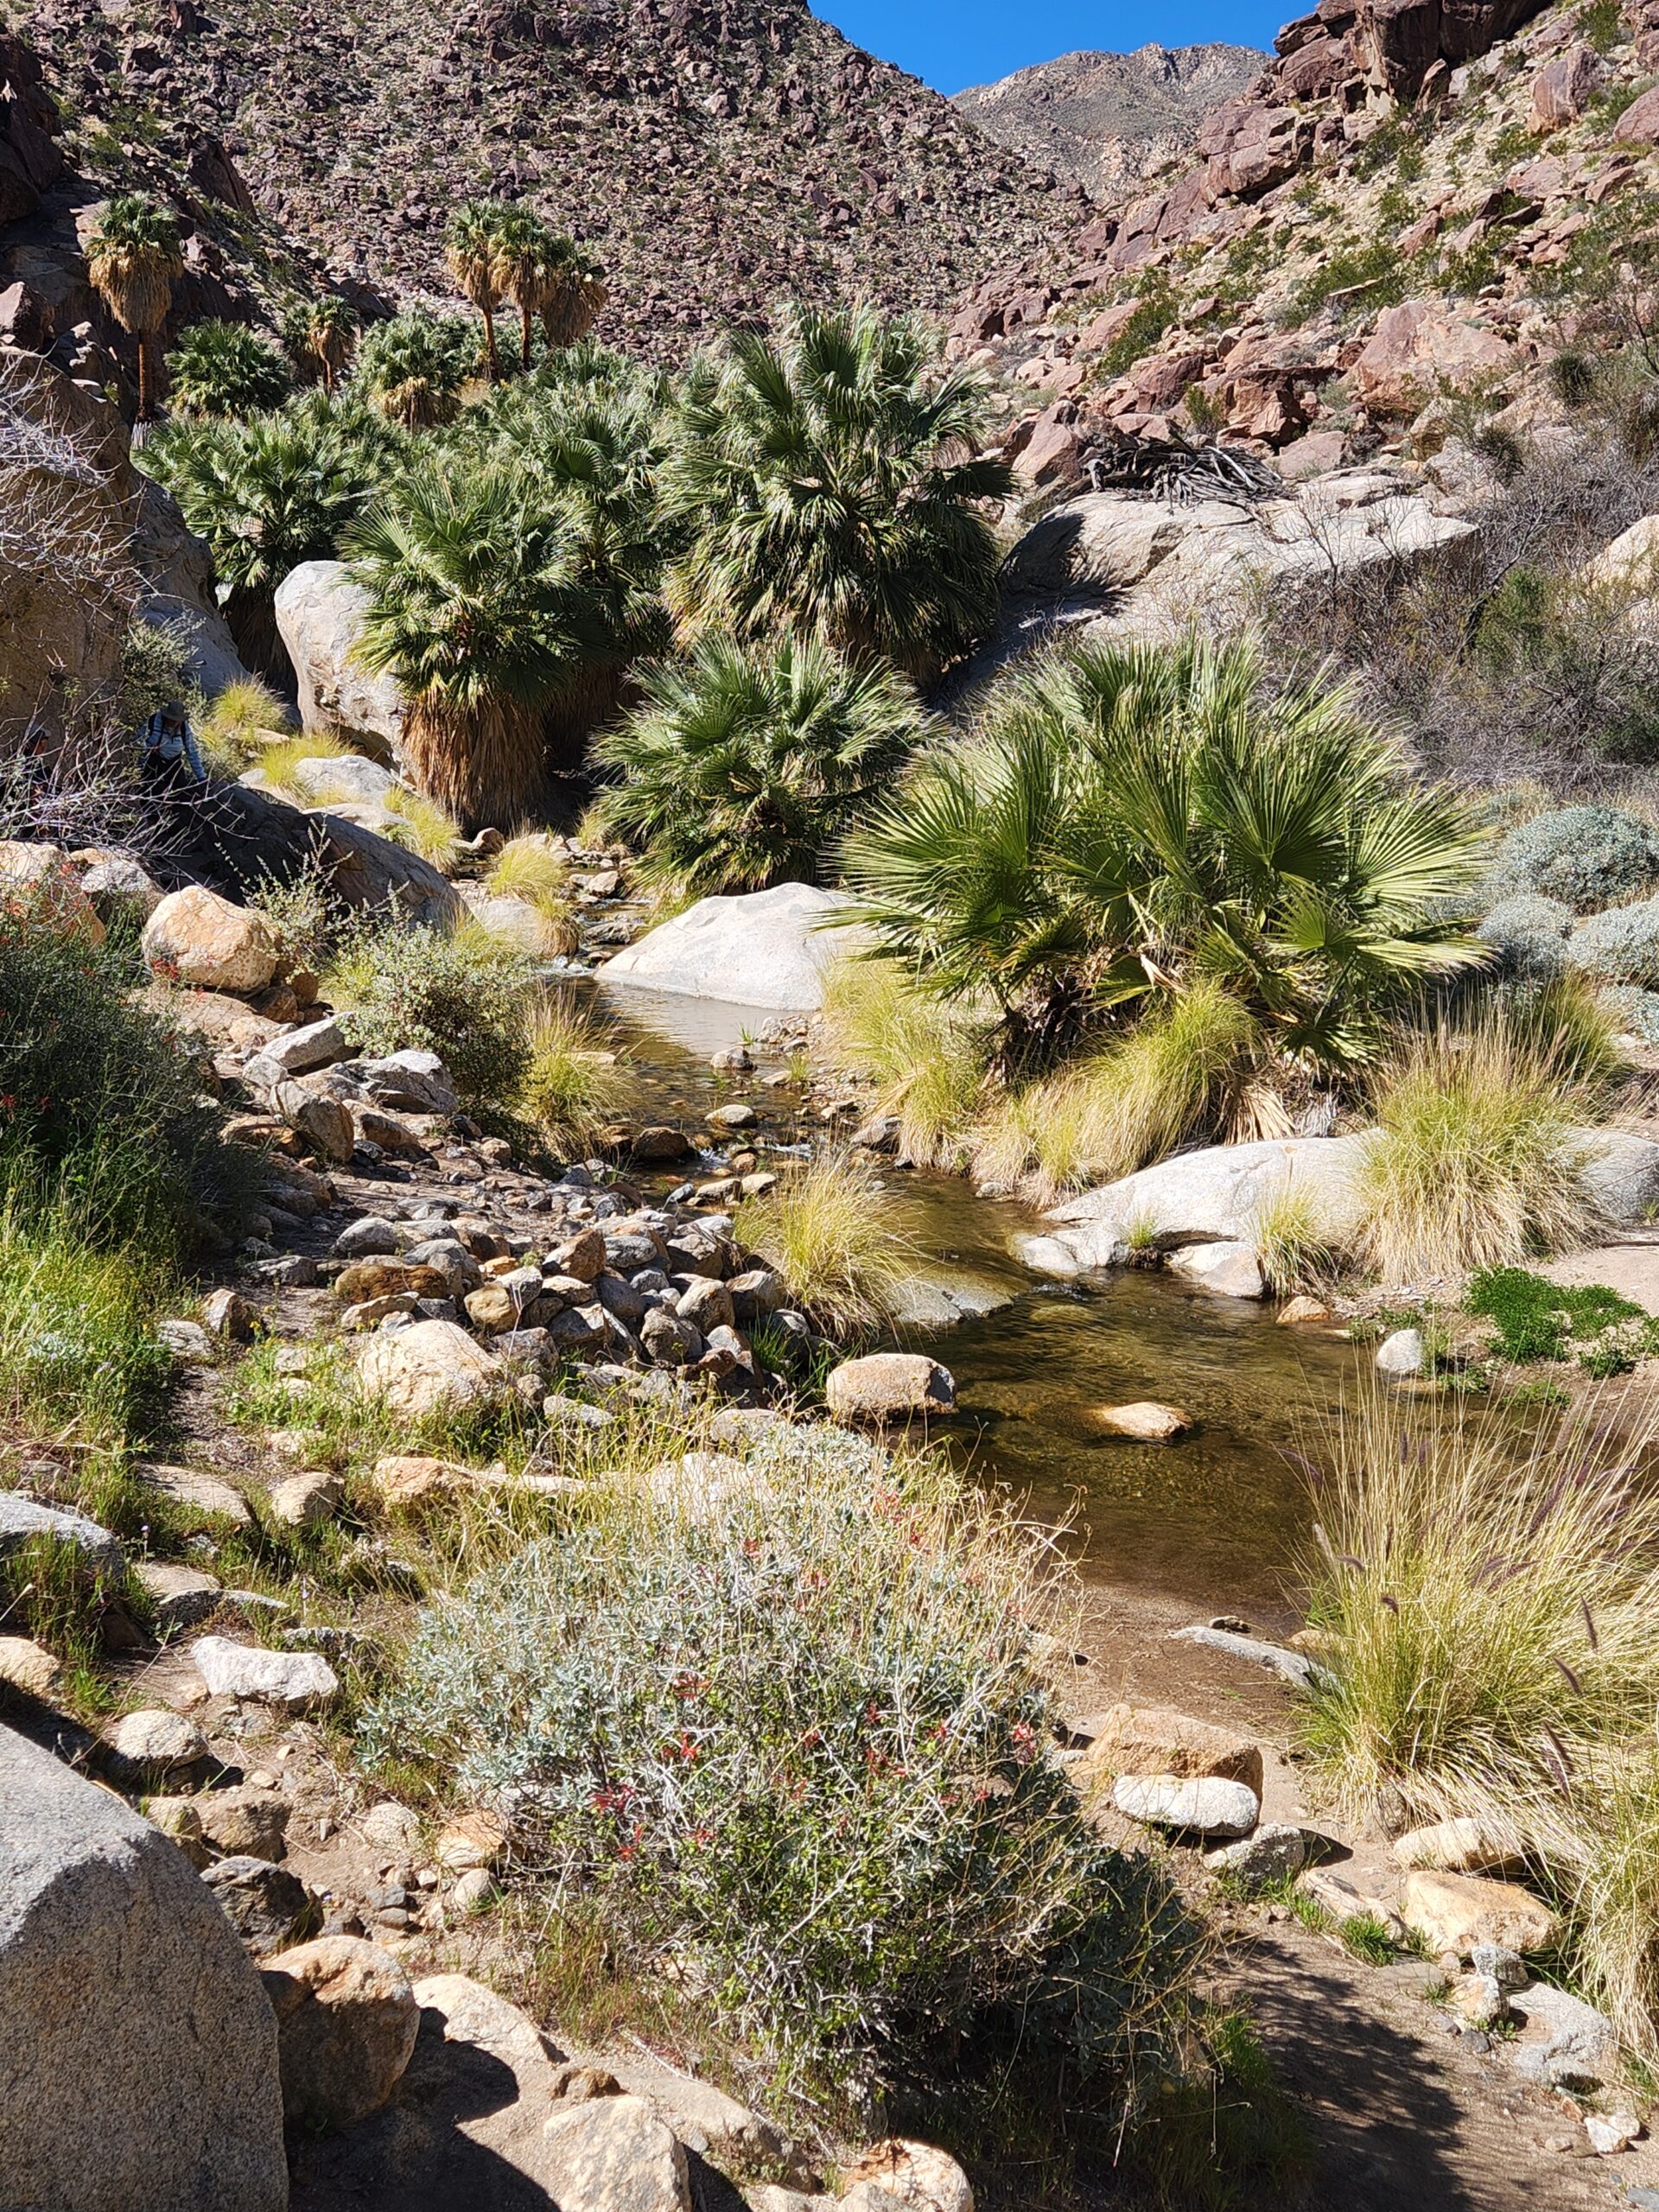 Palm tree oasis and natural spring in Anza Borrego Desert State Park